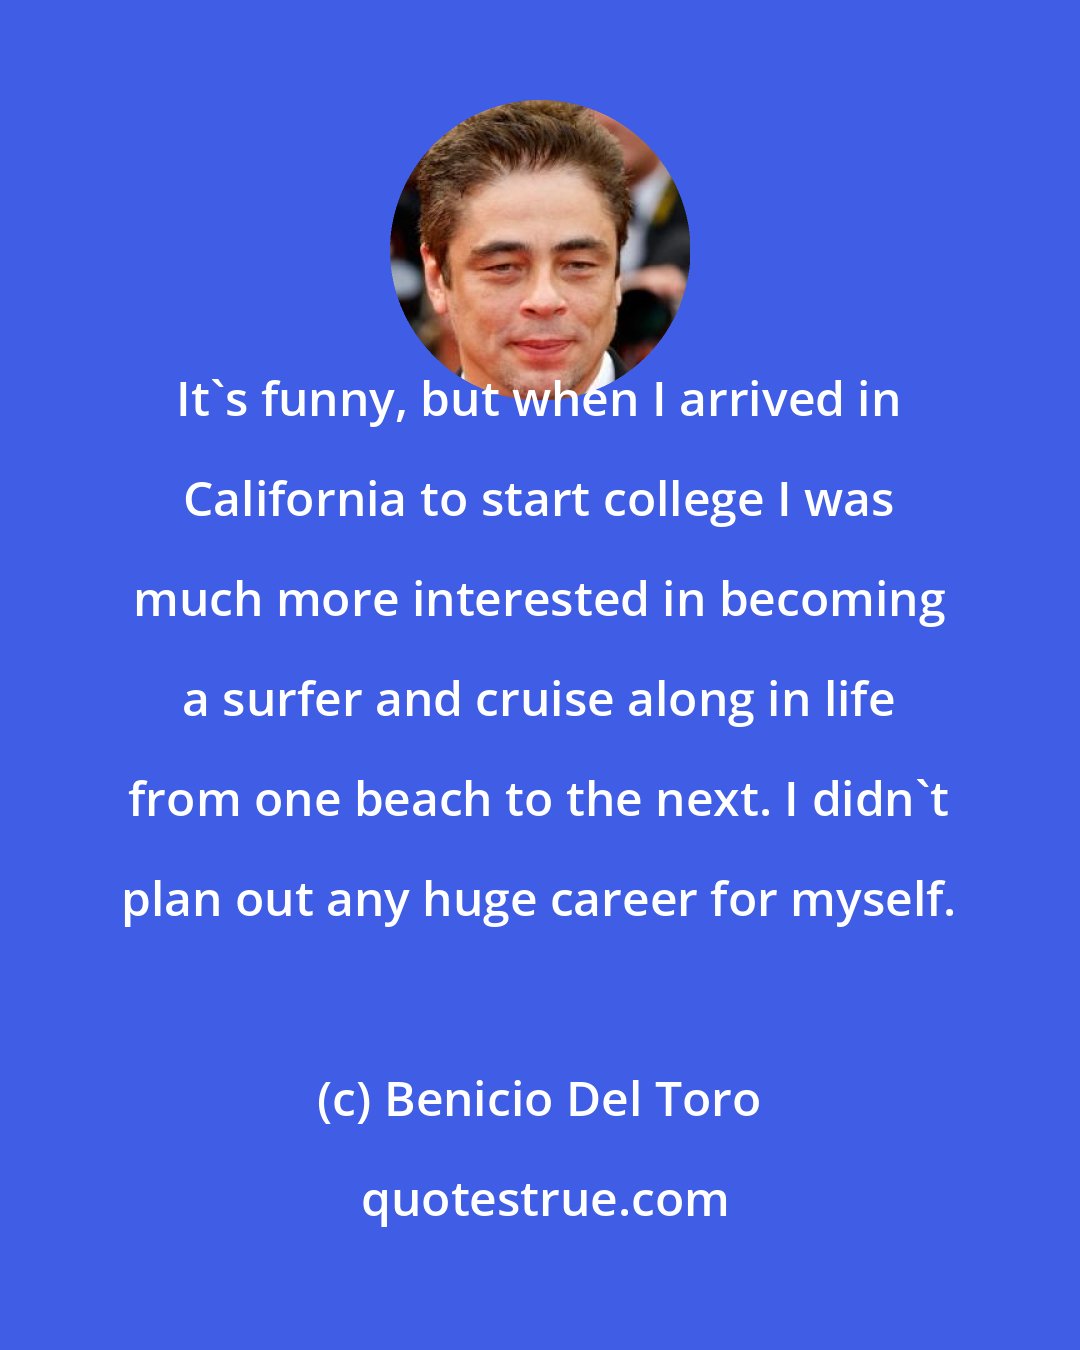 Benicio Del Toro: It's funny, but when I arrived in California to start college I was much more interested in becoming a surfer and cruise along in life from one beach to the next. I didn't plan out any huge career for myself.